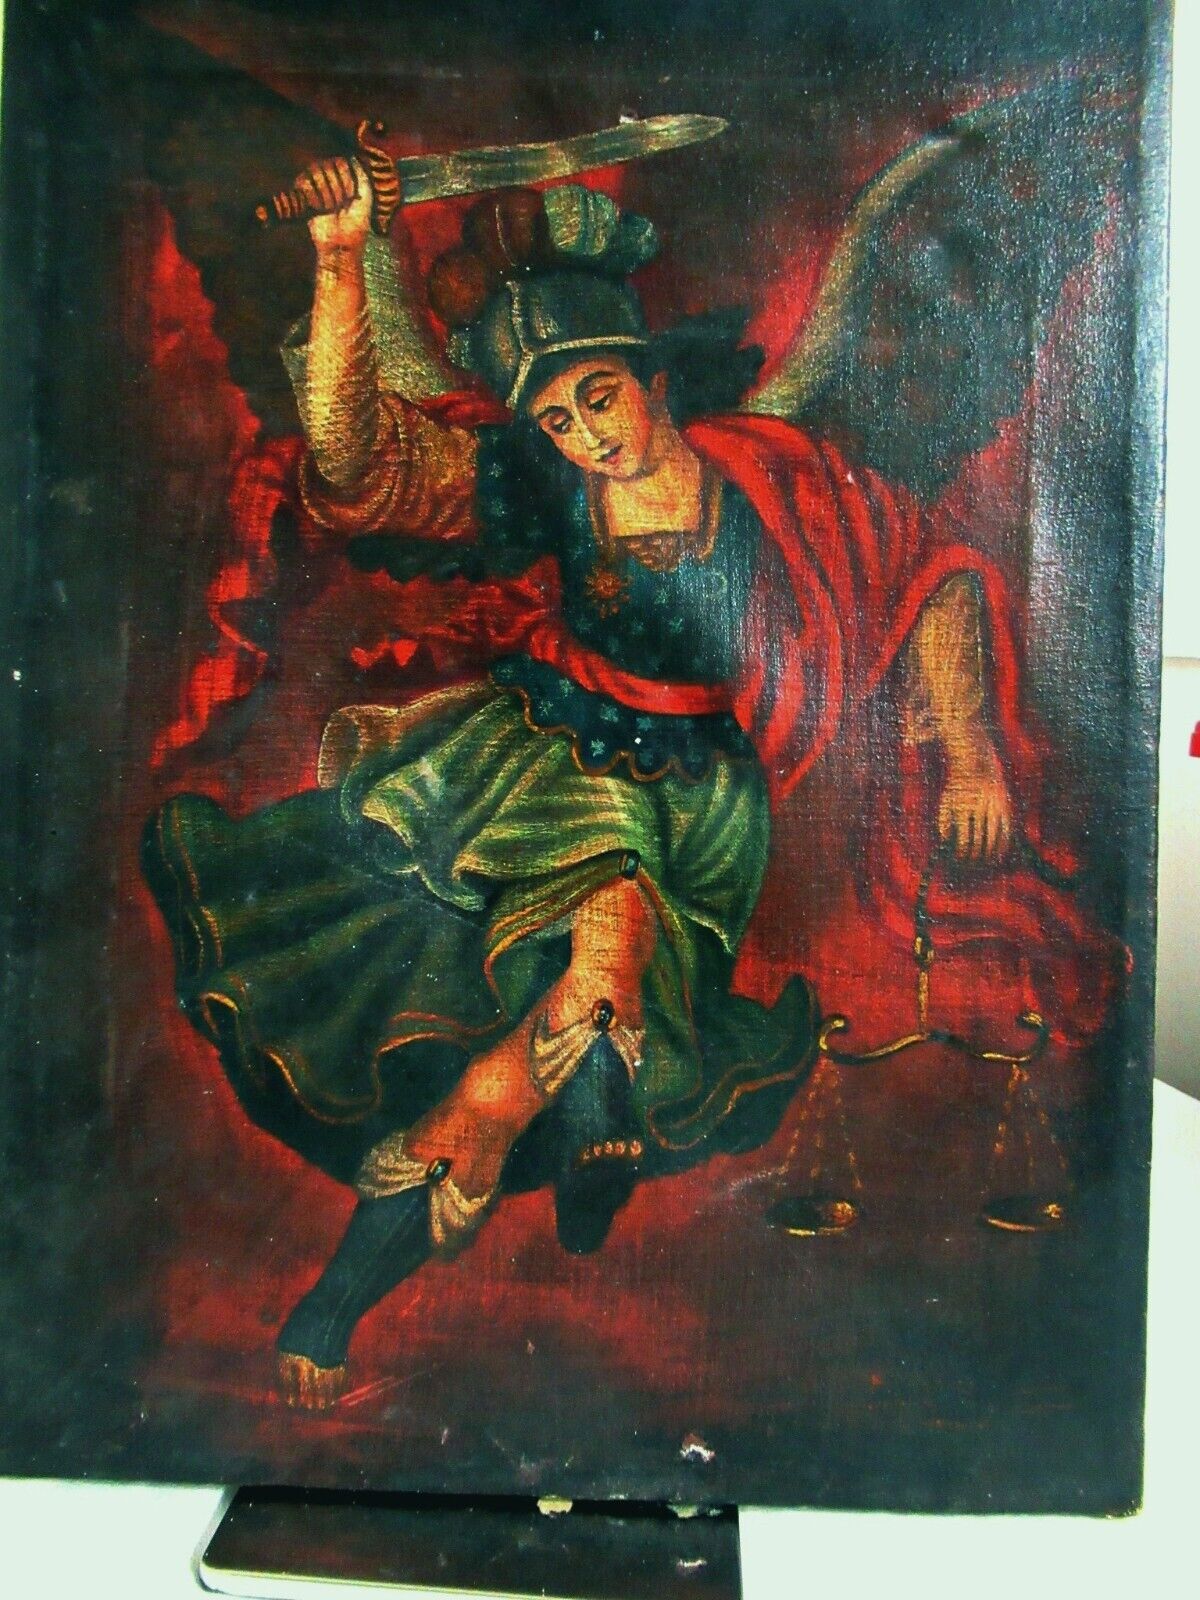 VTG 1940's MEXICAN 16x12 OIL ON CANVAS PAINTING ARCHANGEL SAN MIGUEL/ST. MICHAEL